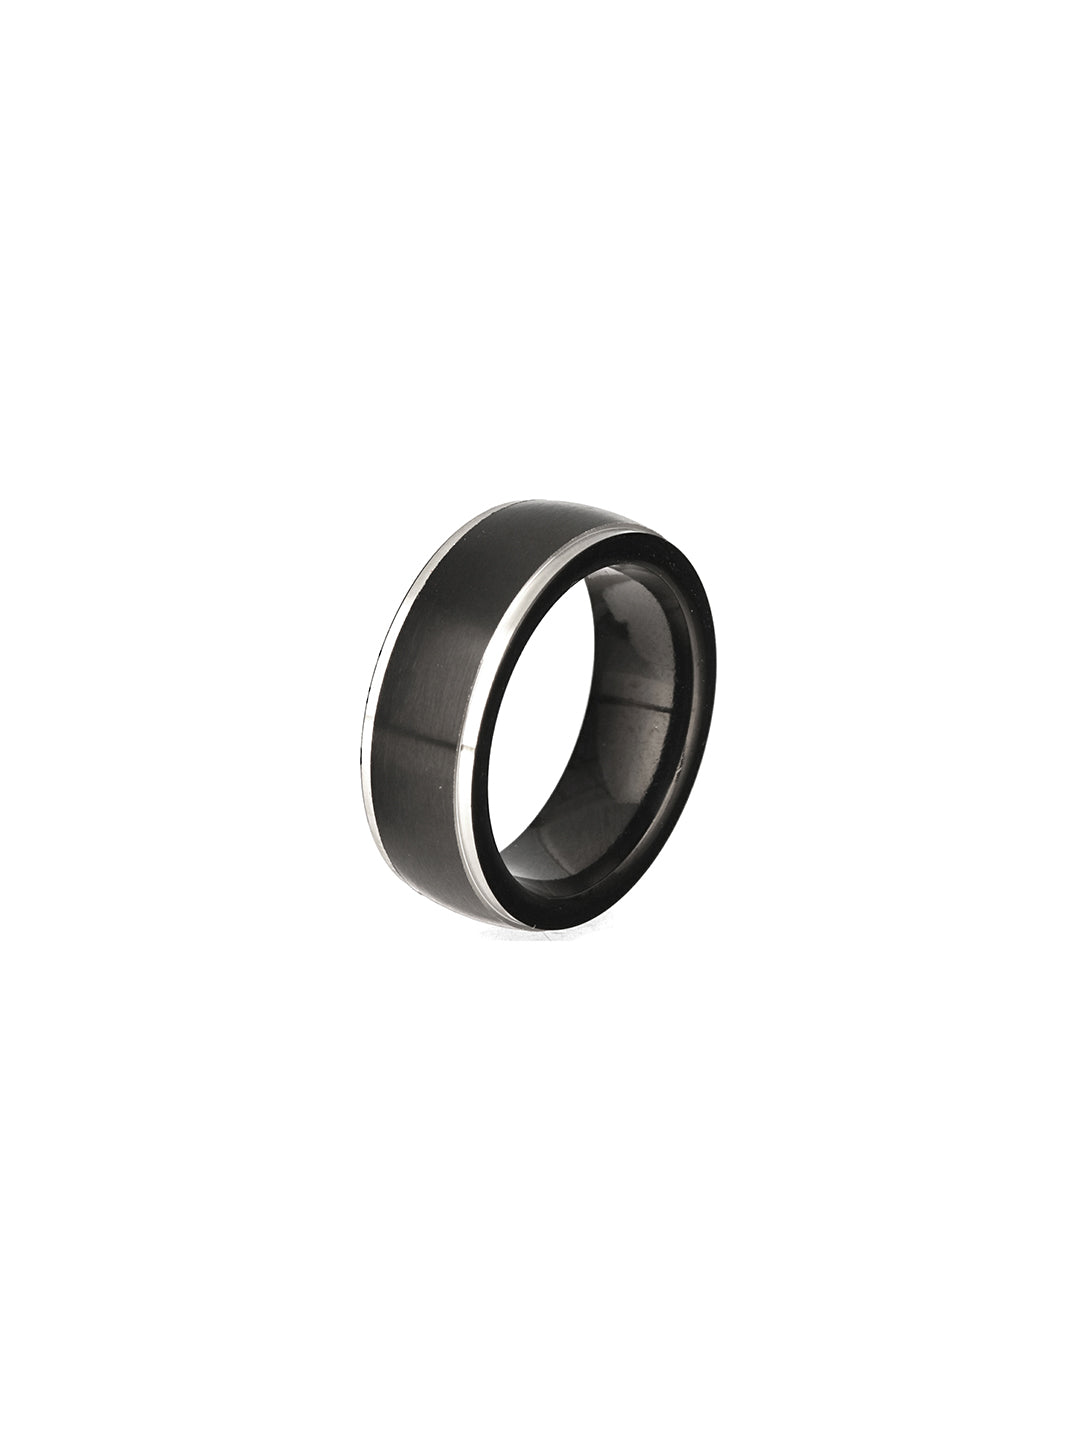 Jazz And Sizzle Men Platinum-Plated Black & Silver-Toned Stainless Steel Finger Ring - Jazzandsizzle